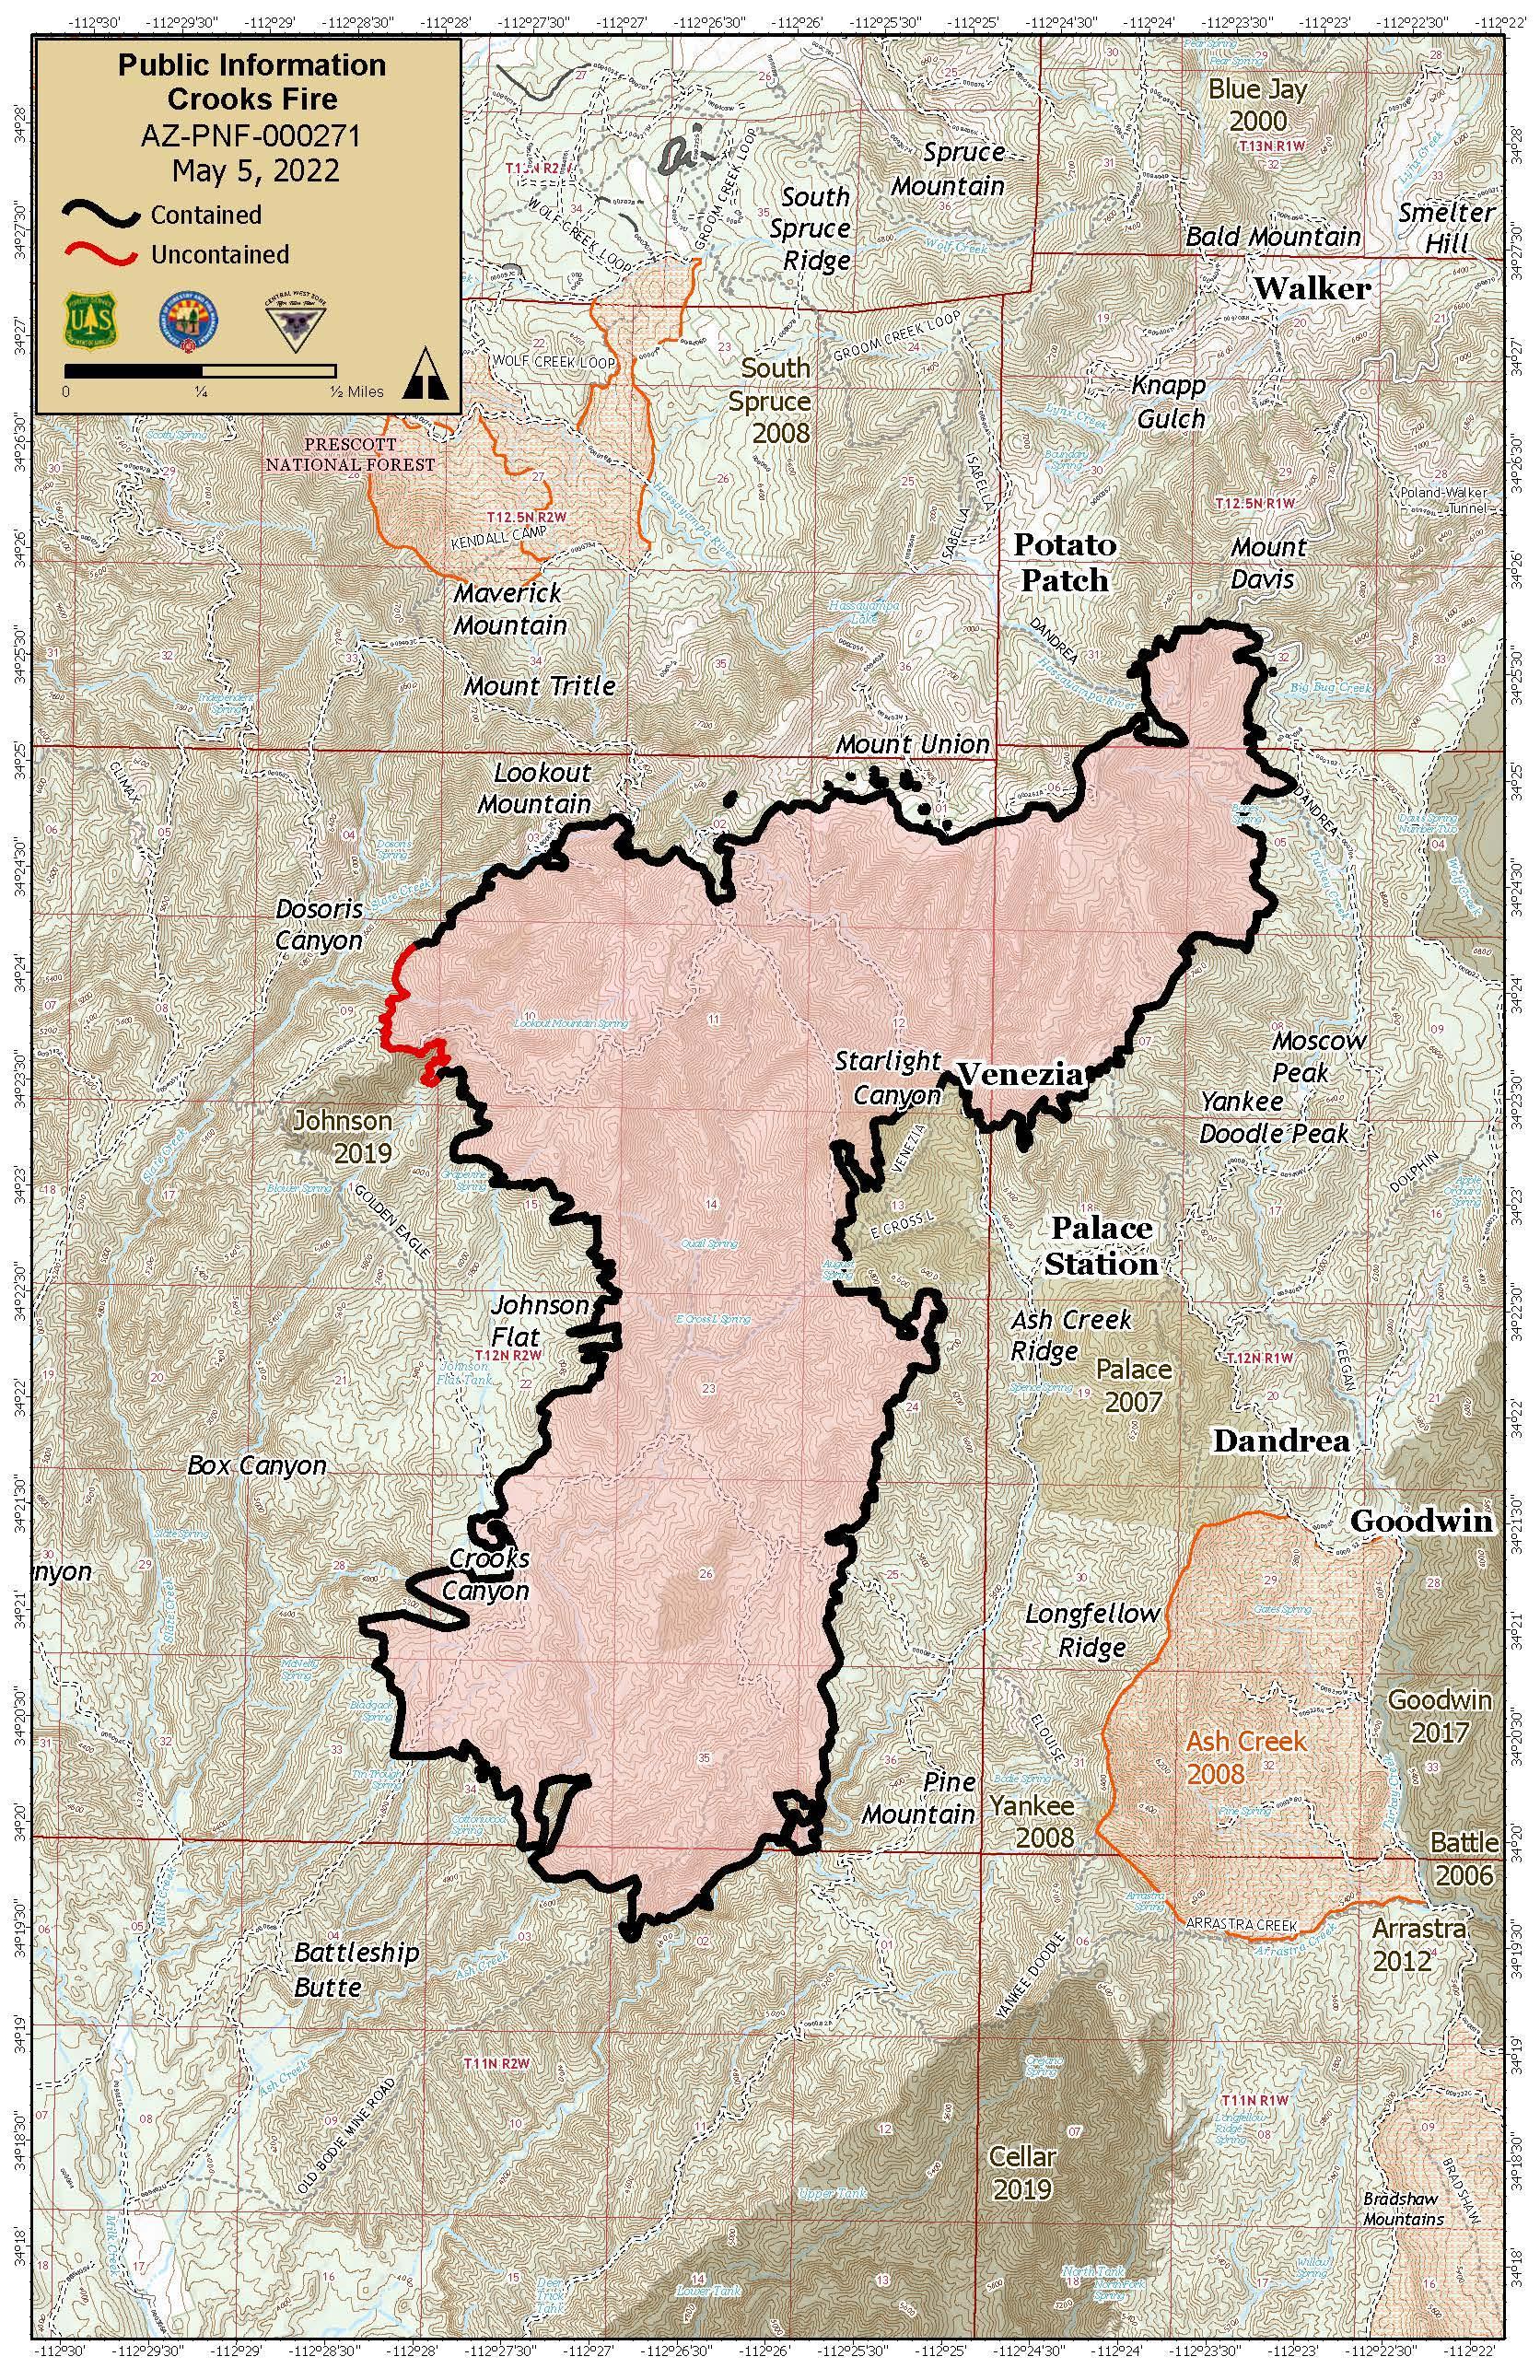 Thursday May 5, 2022 Crooks Fire Map